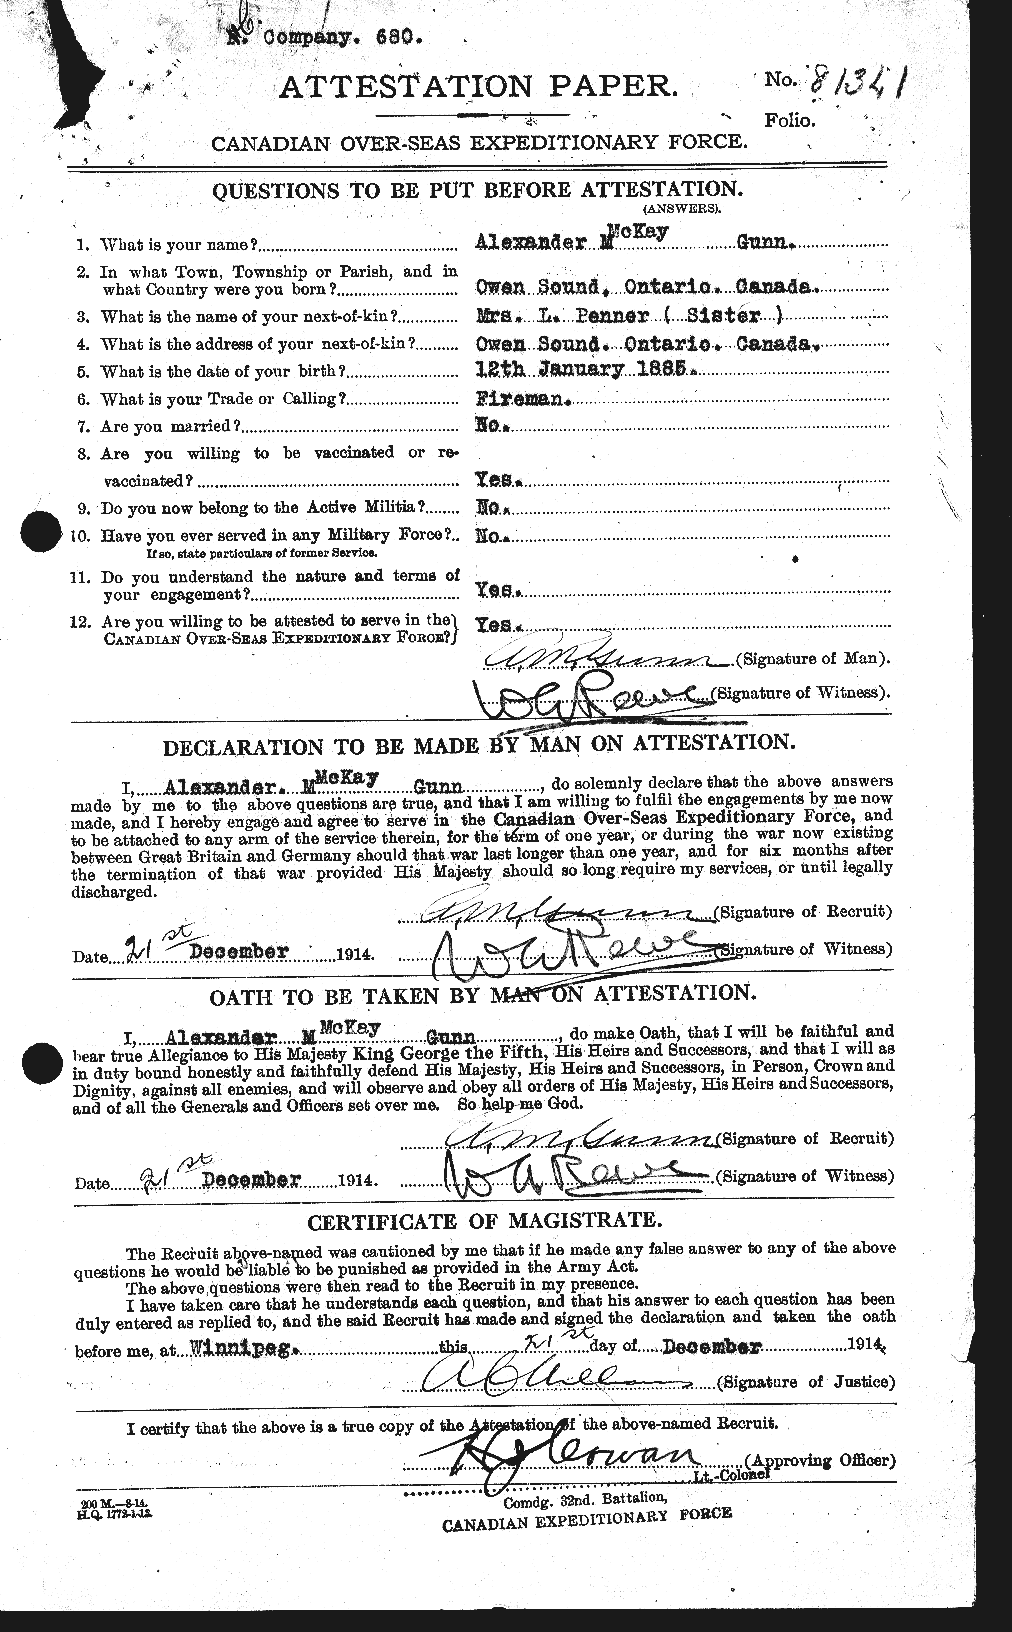 Personnel Records of the First World War - CEF 367991a